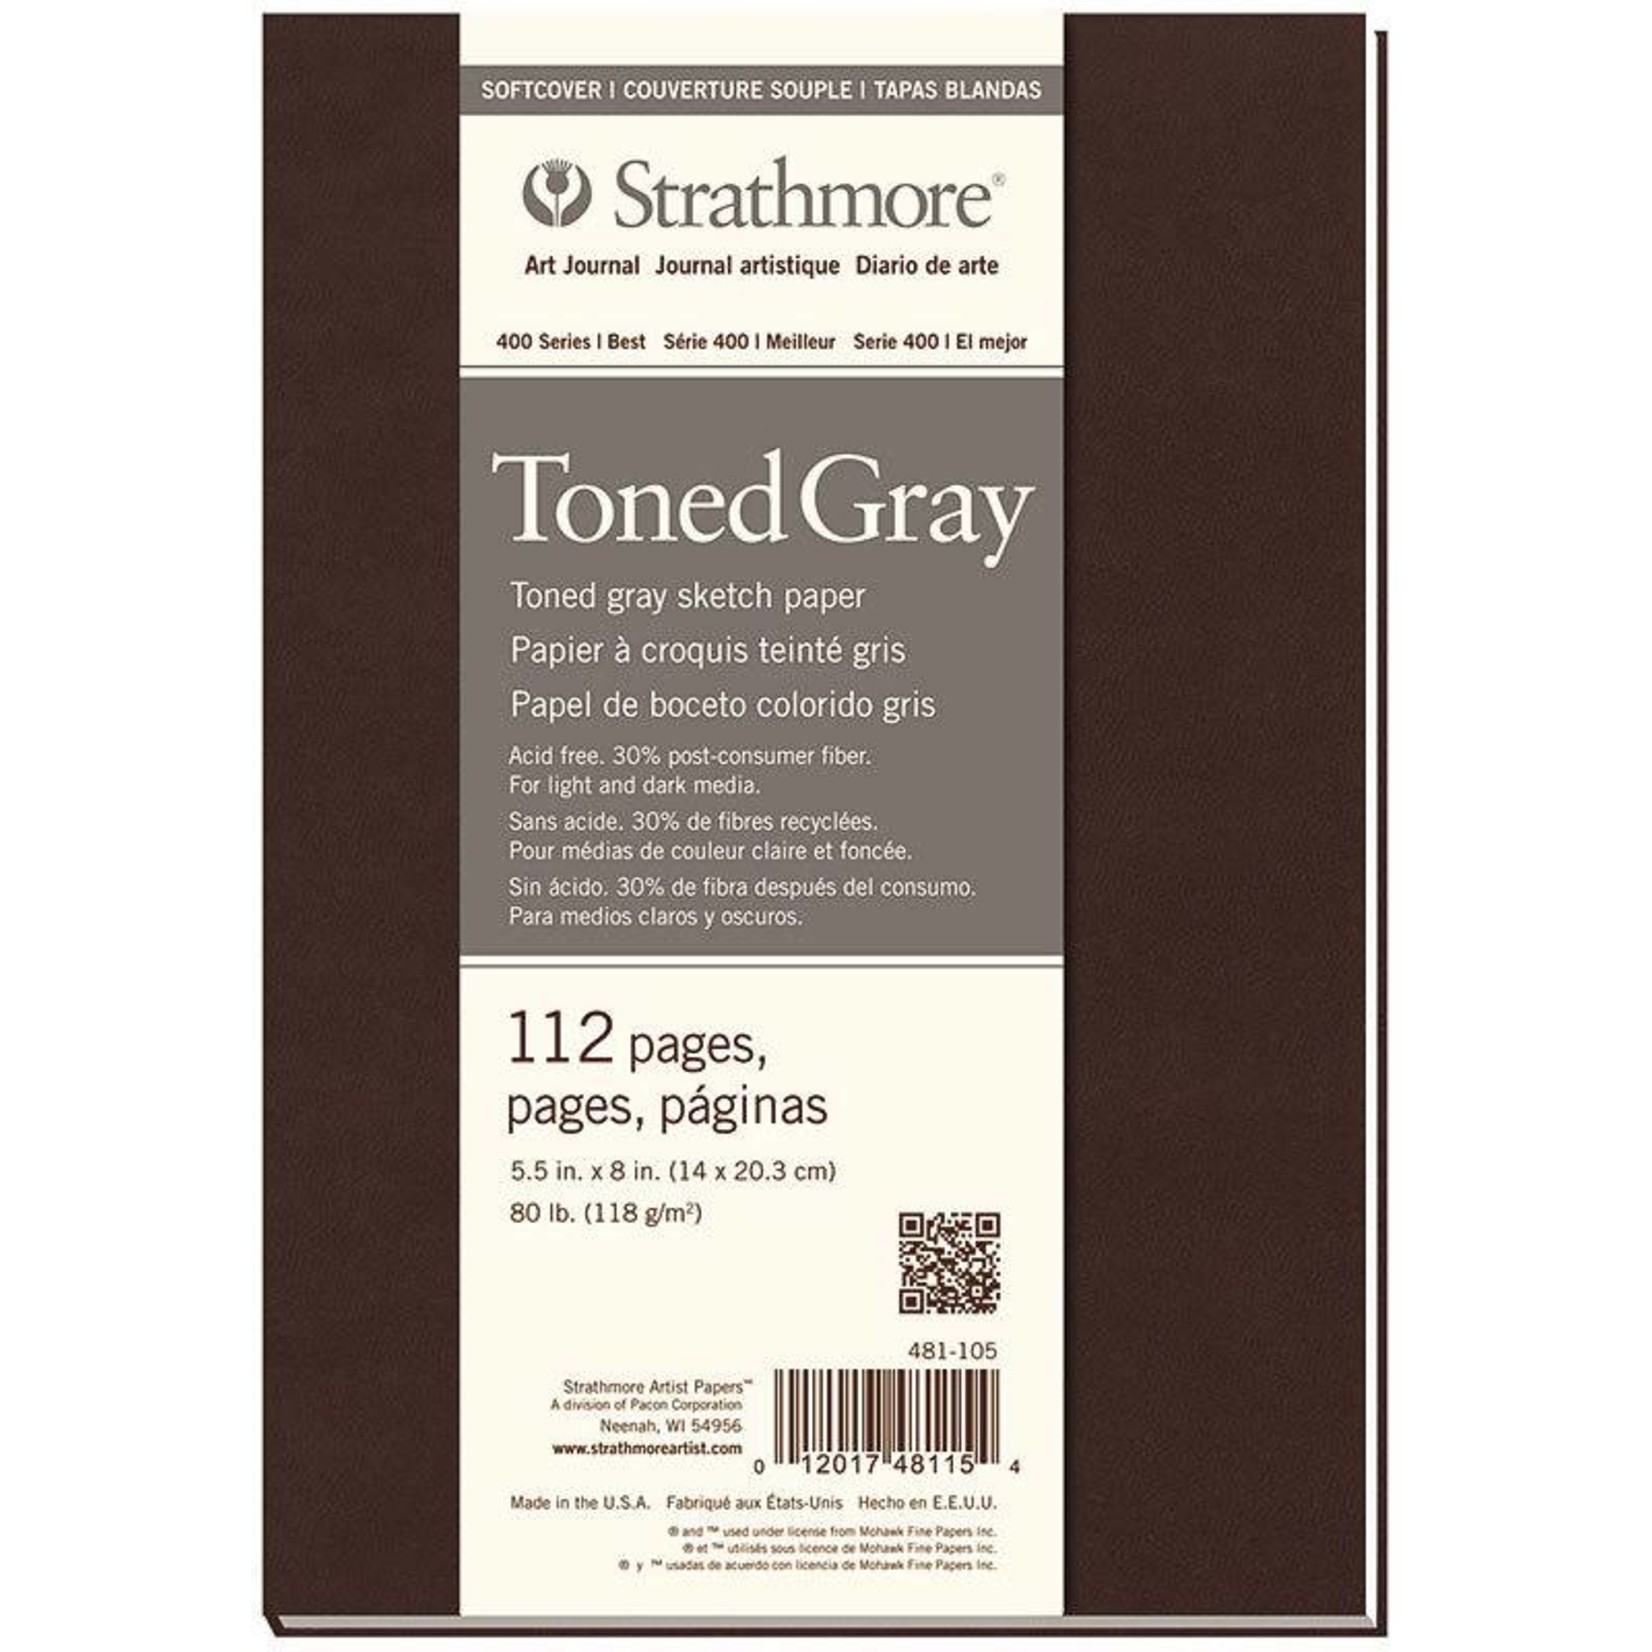 STRATHMORE STRATHMORE TONED GRAY SKETCH PAPER PAD SOFT COVER 7.75X9.75